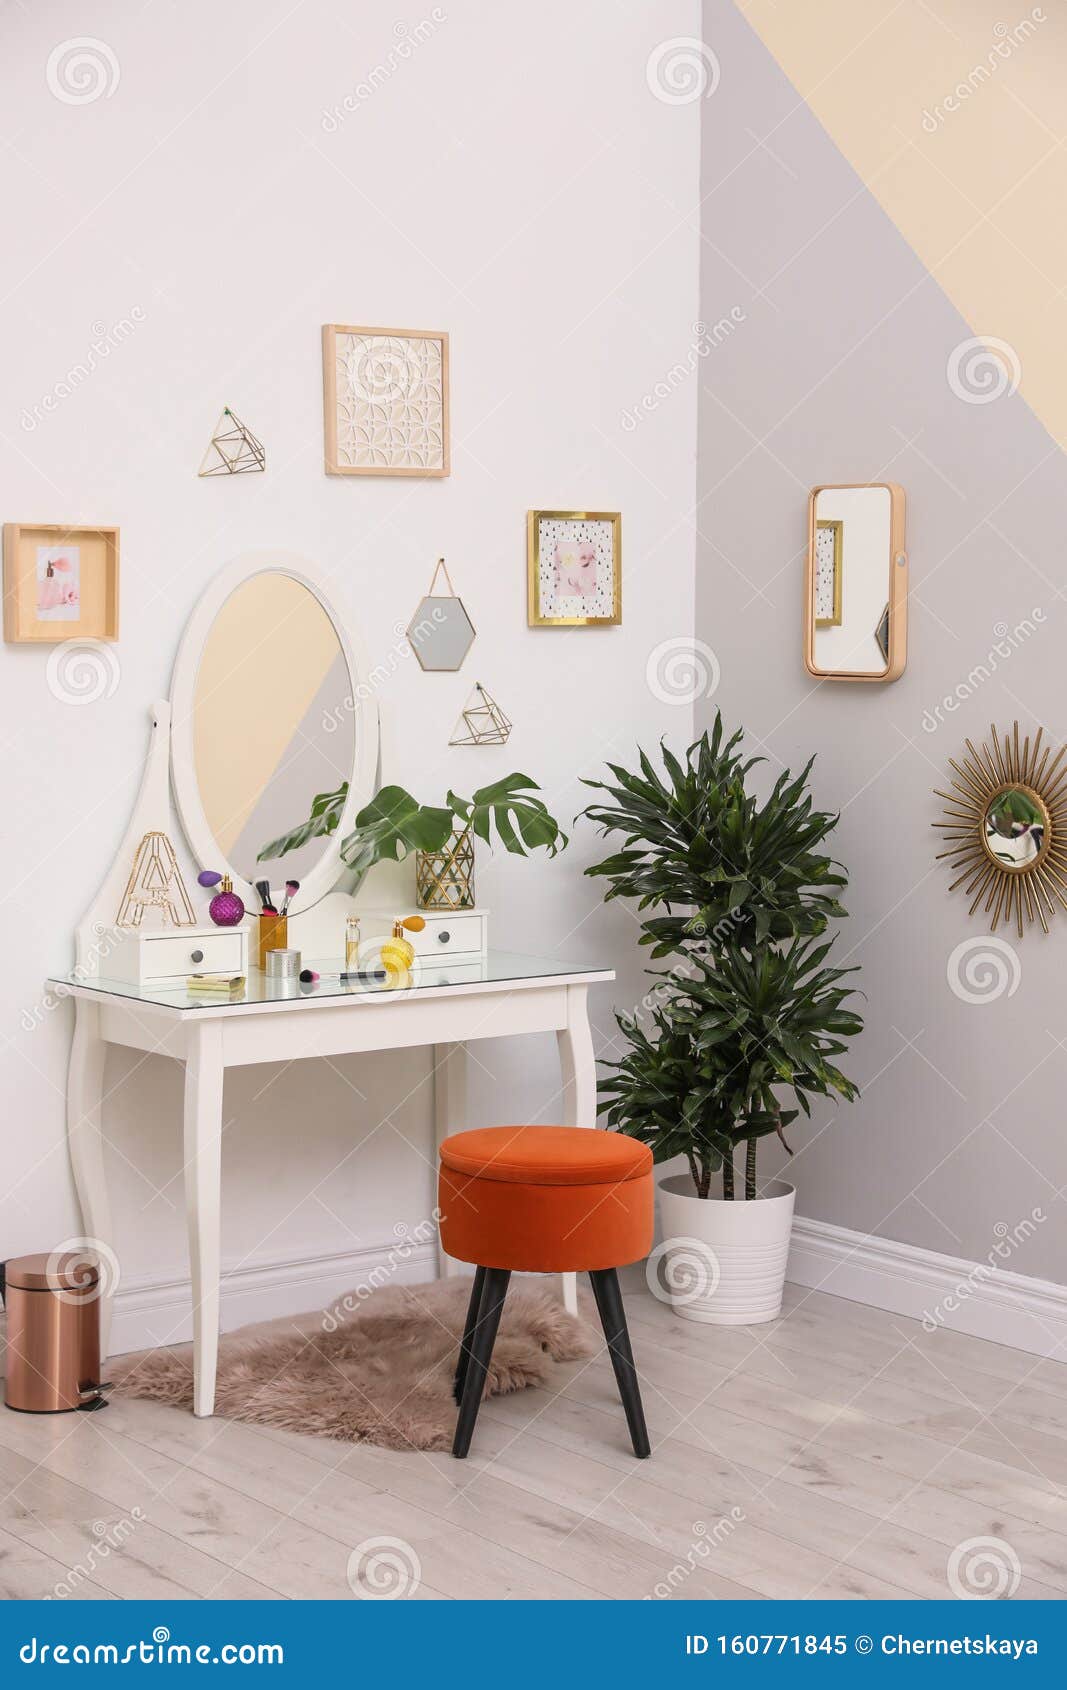 Stylish Room Interior With Modern Dressing Table Near Wall Stock Image Image Of Idea Domestic 160771845,Modern Style Bedroom Modern Dressing Table Design